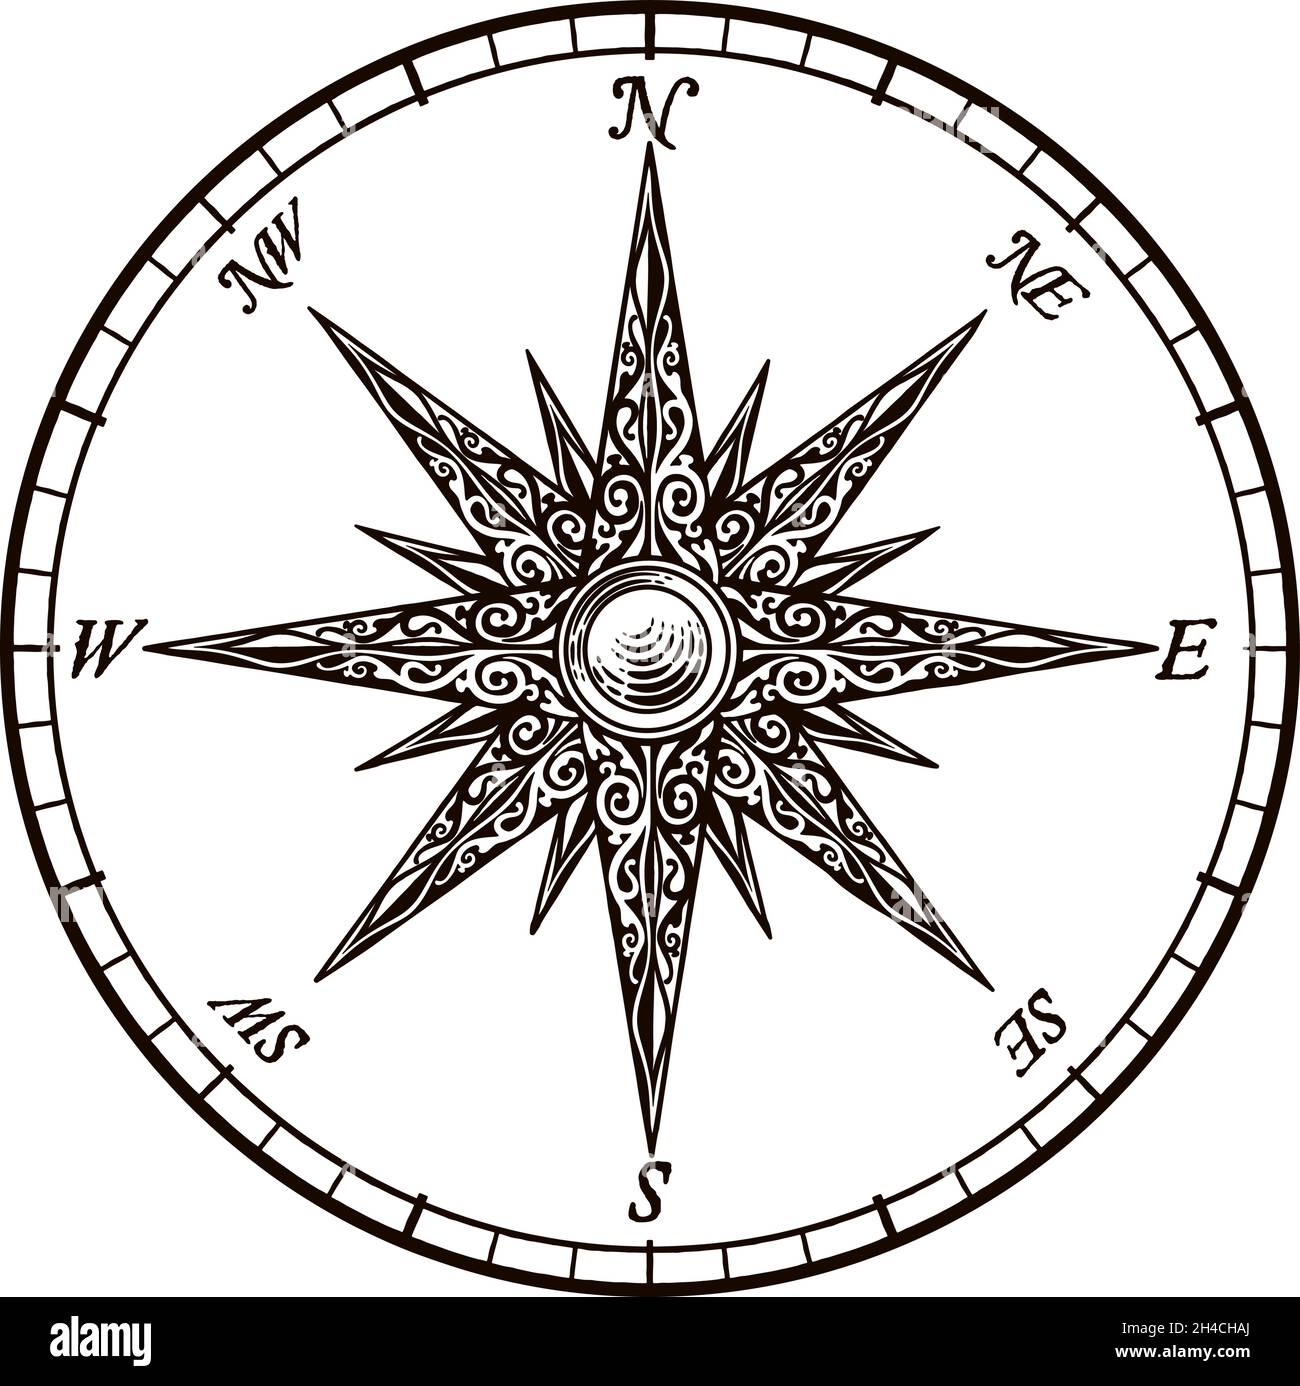 Compass Rose Old Vintage Engraved Etching Map Icon Stock Vector